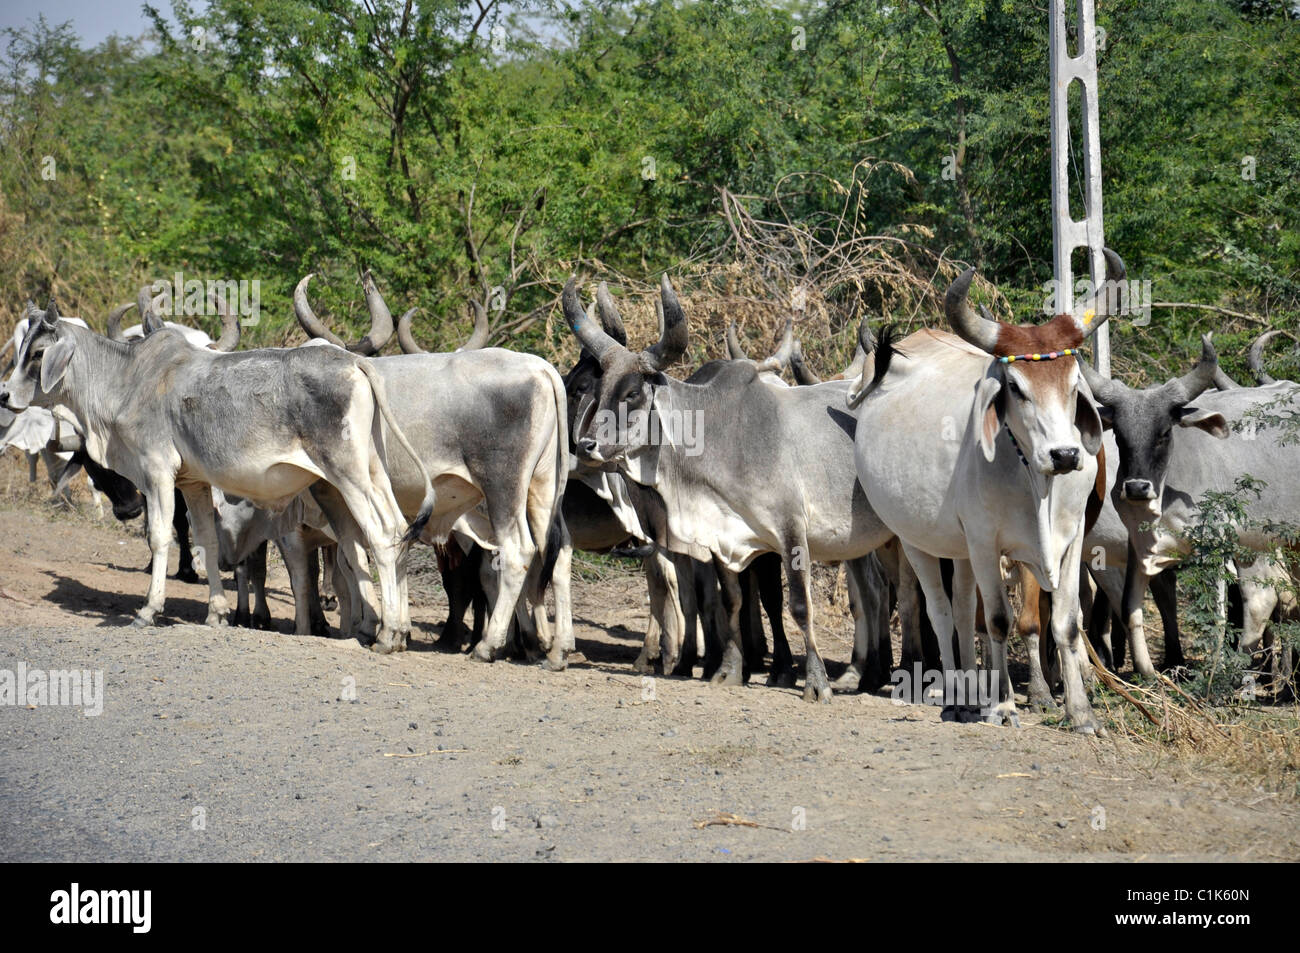 Cattle in India Stock Photo